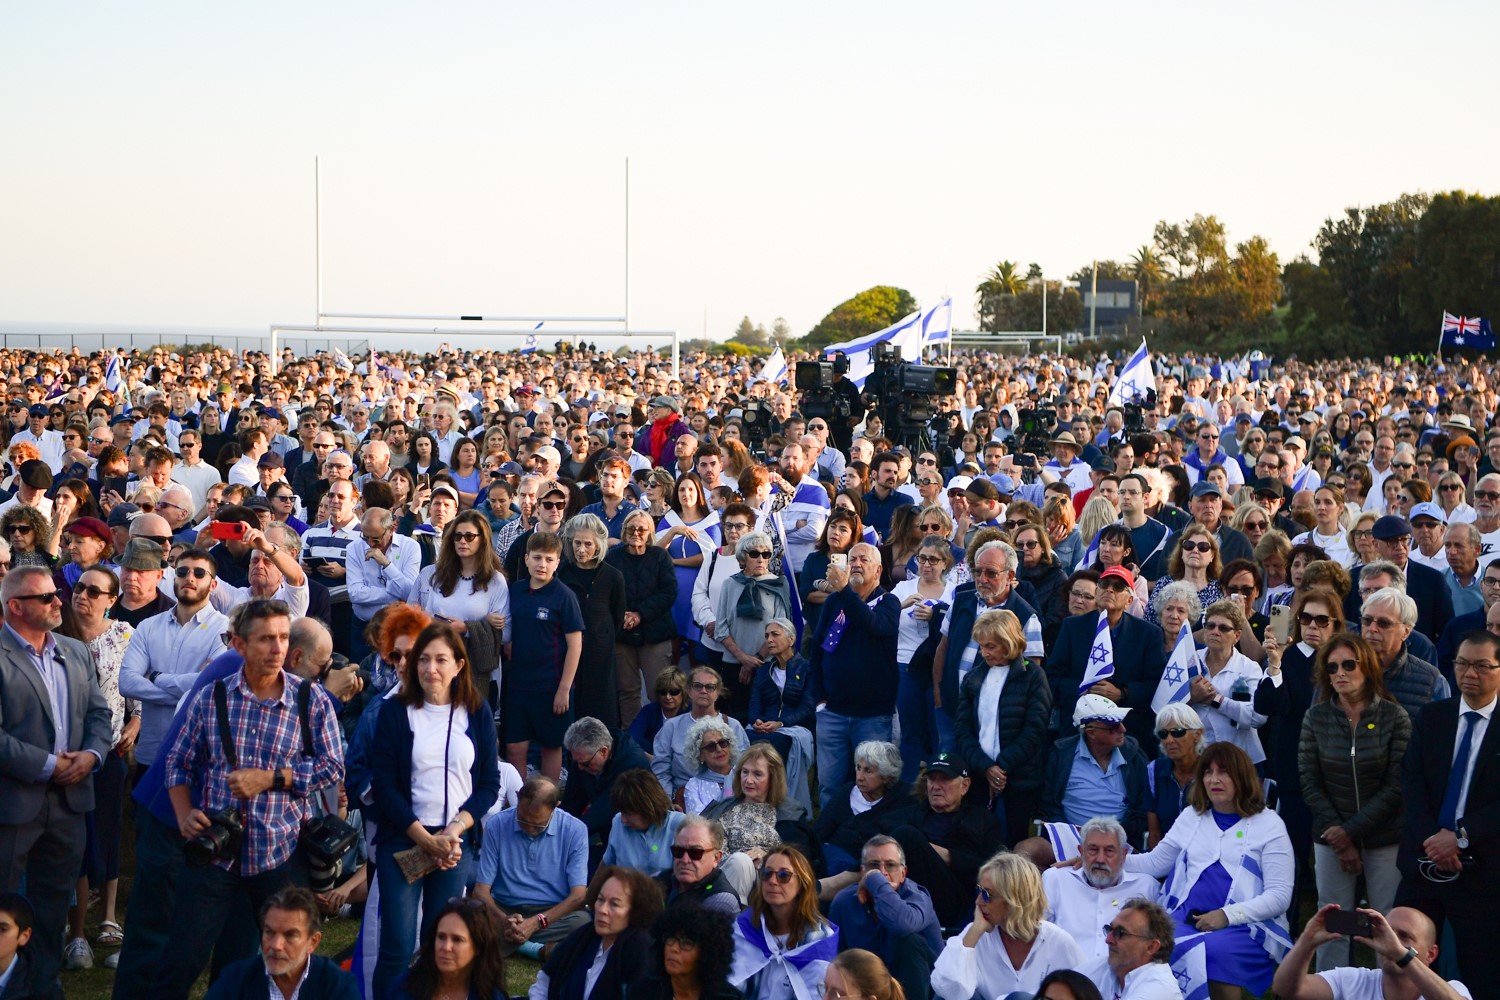 A large group of people is pictured during a ralley carrying Israelian flags.